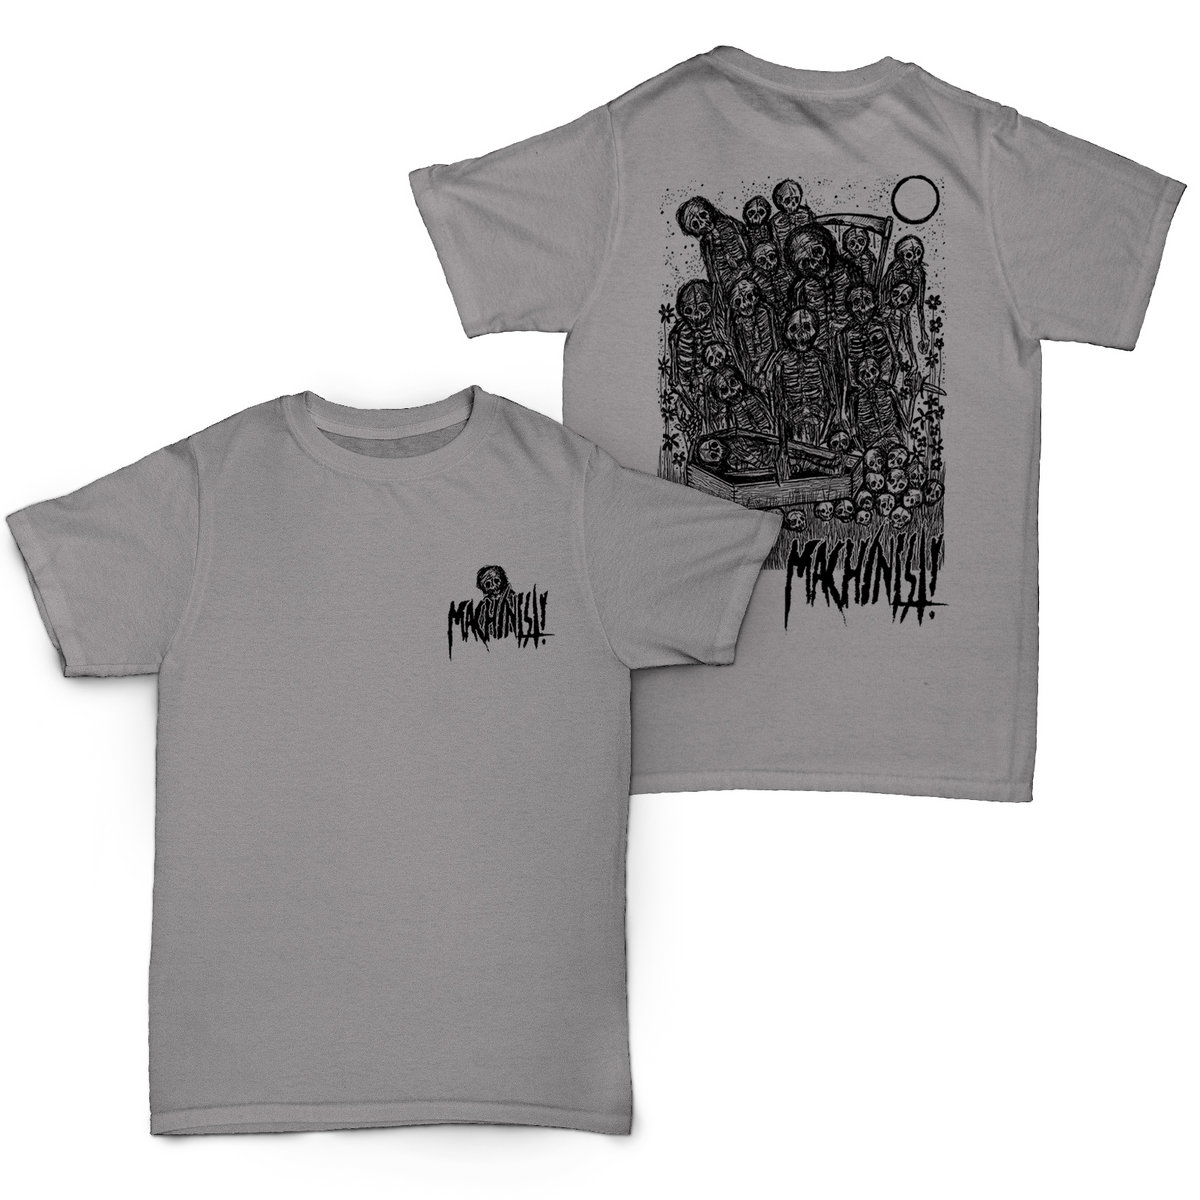 Machinist! - Skeleton Party T-Shirt - SMALL